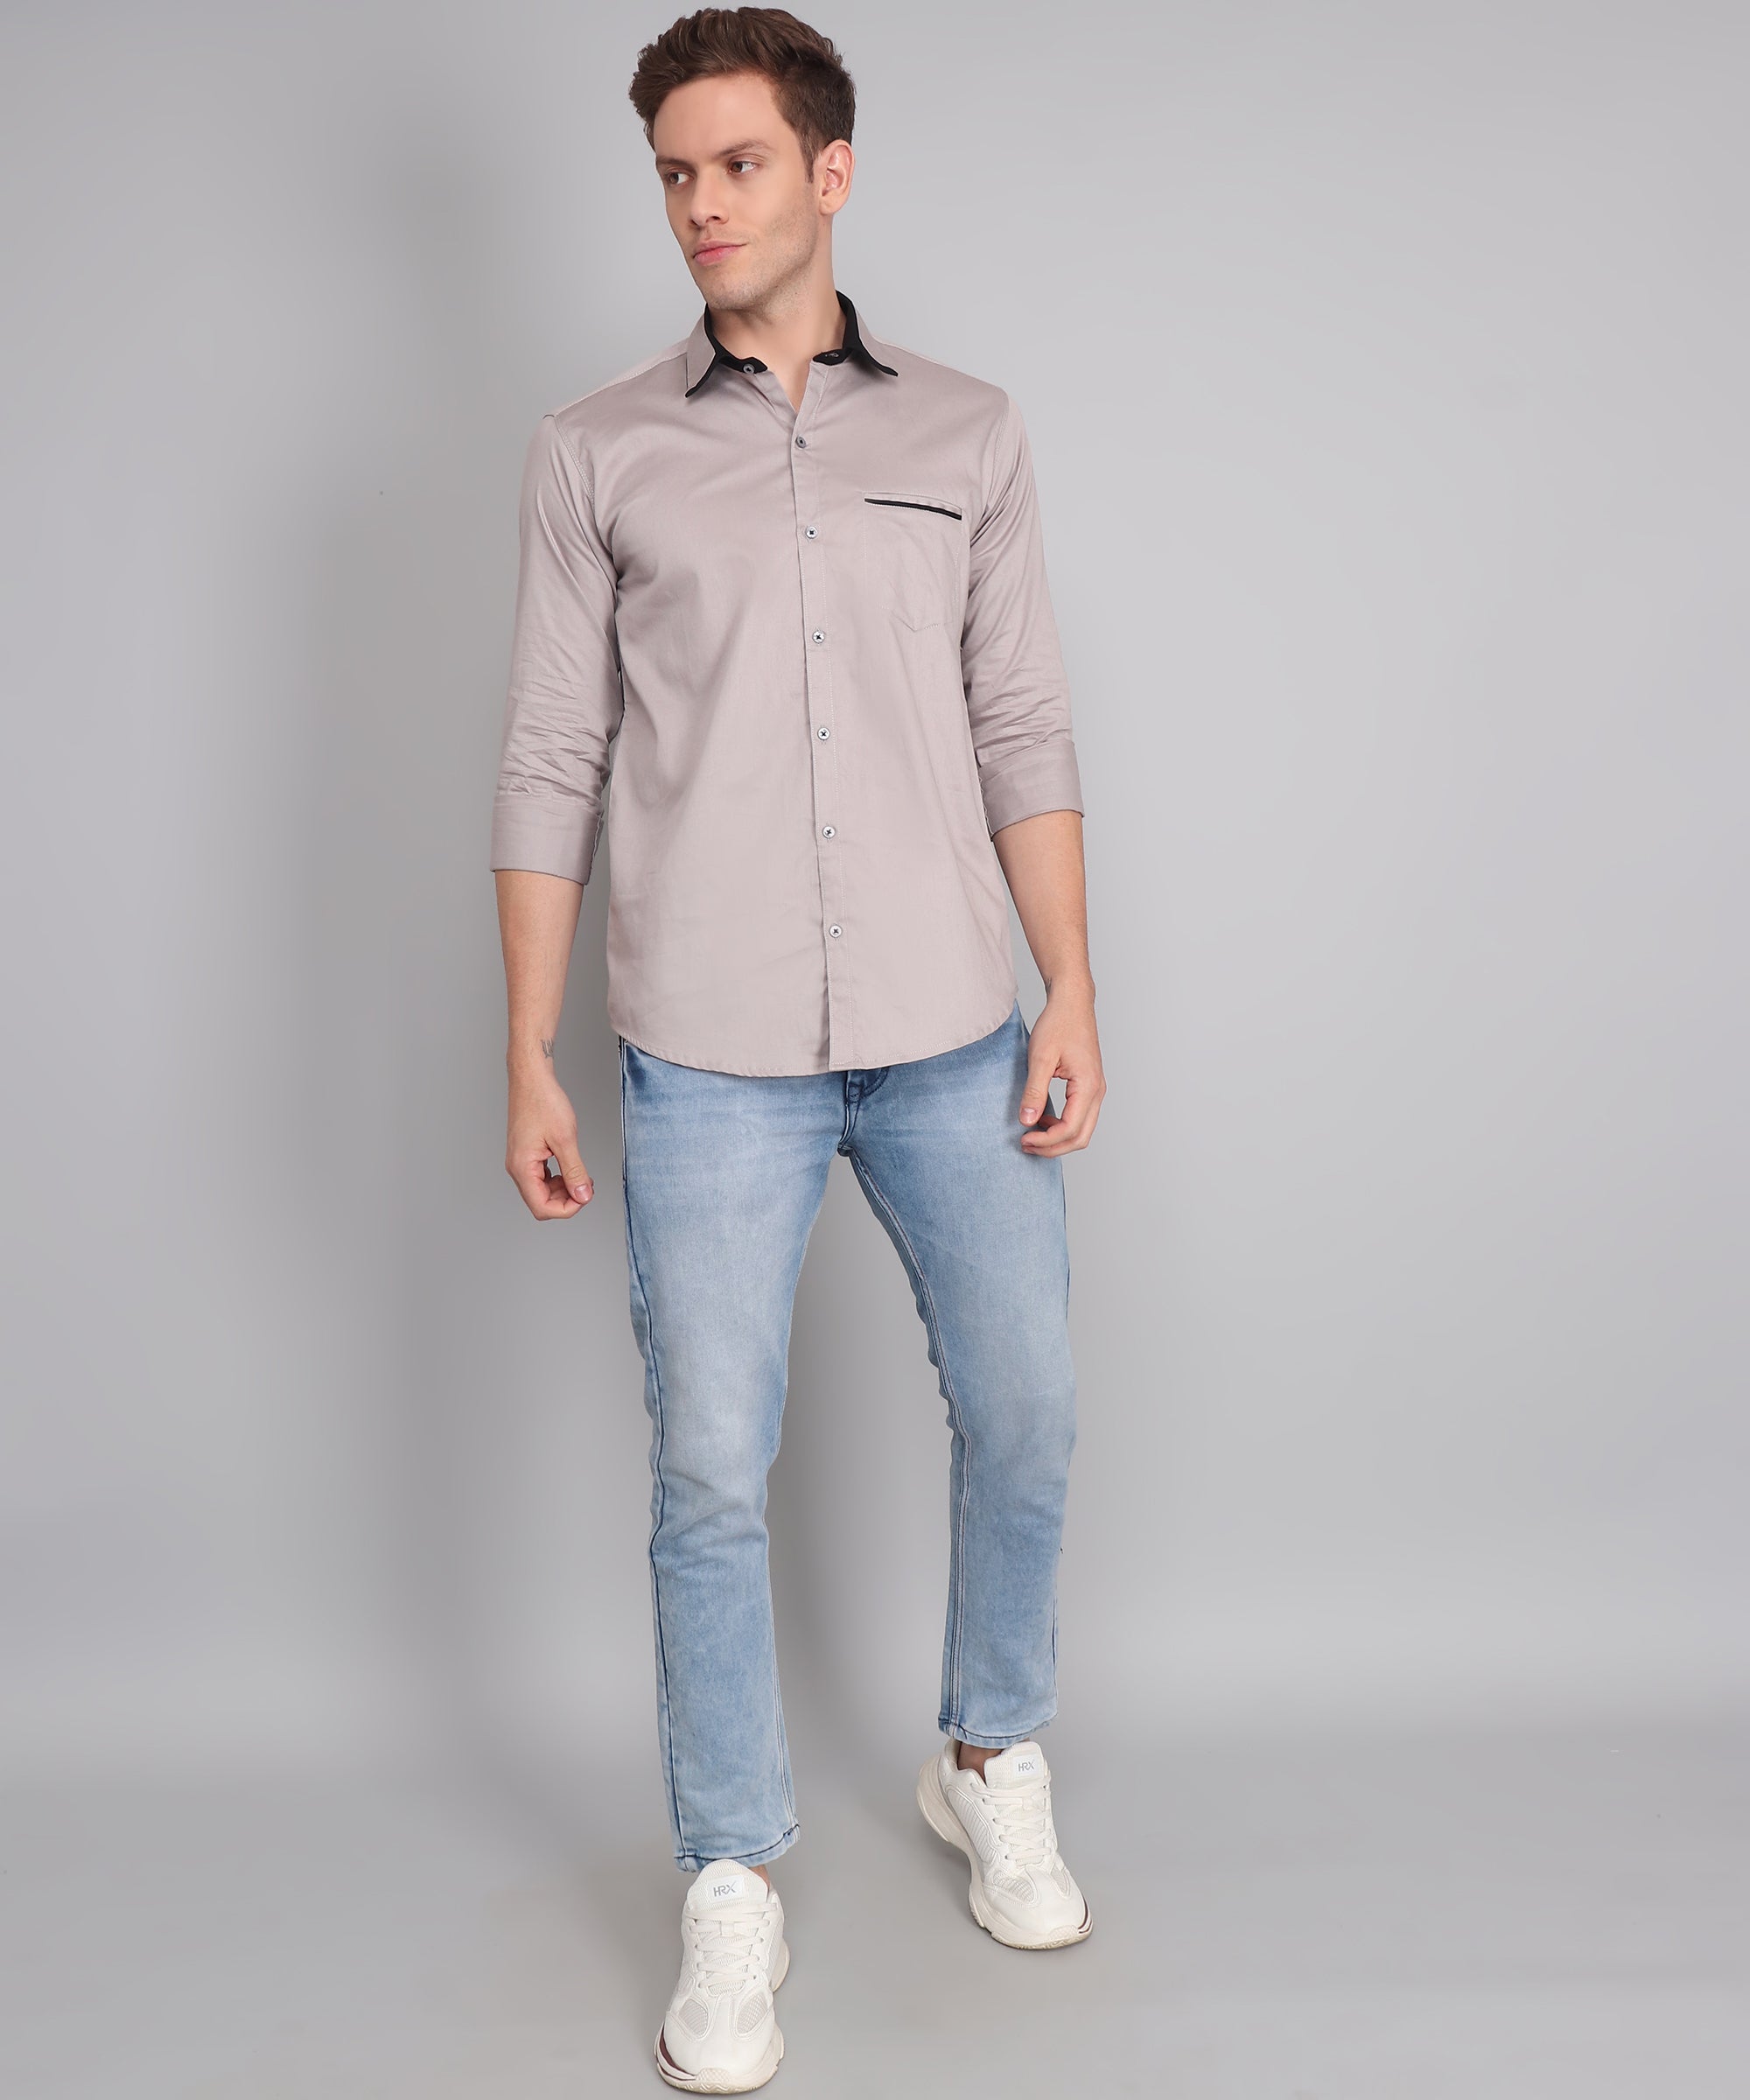 Effortless Chic: The Contemporary Appeal of Broadcloth Casual Shirts for Men